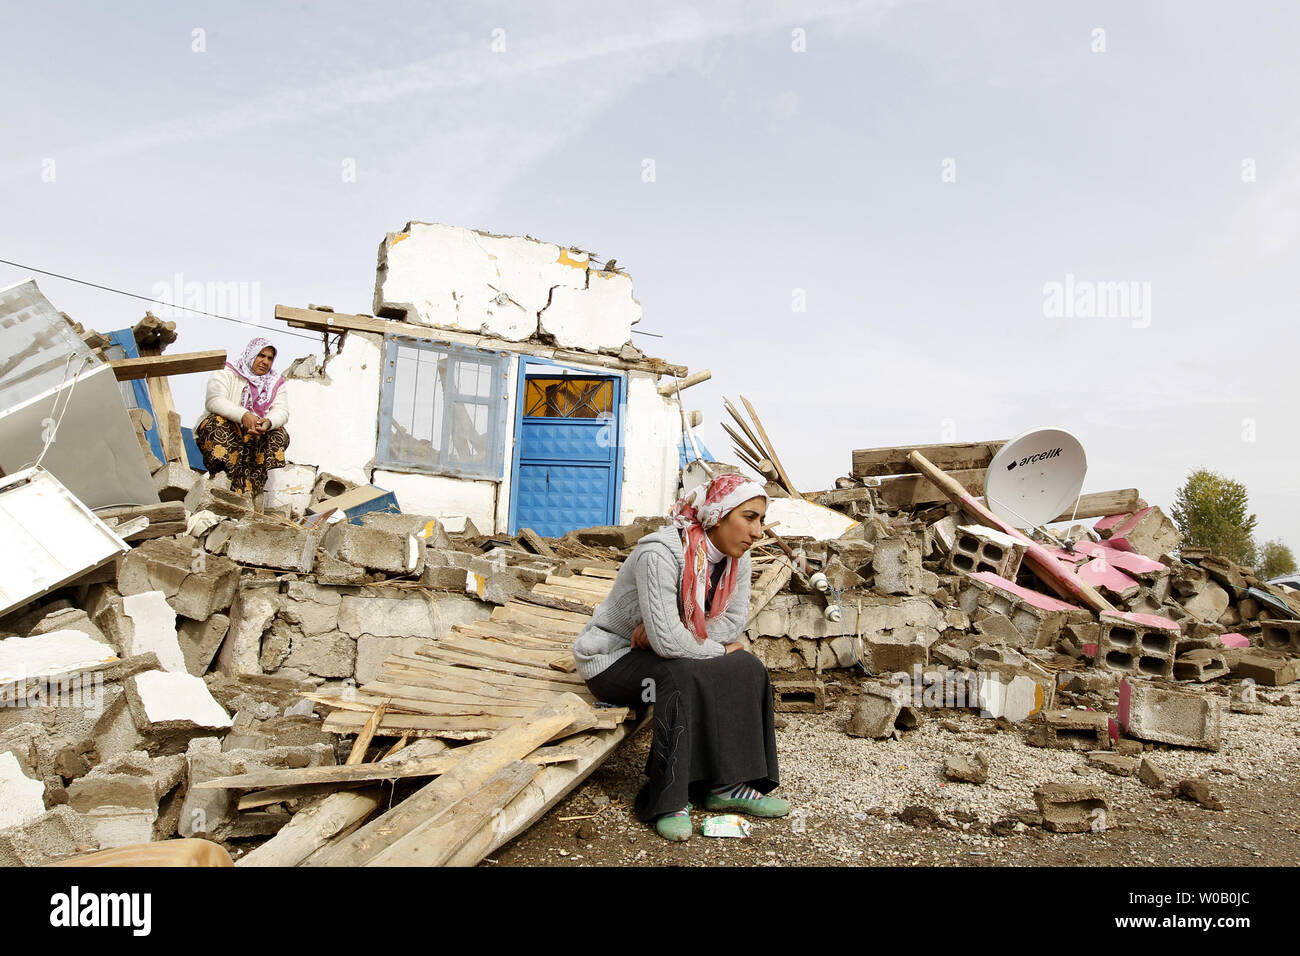 Aysel sits in front of her house in Guveali Koyu on October 26, 2011, near Ecris, Turkey.  Three days after 7.2 magnitude earthquake struck Turkey killing at least 400 and injuring more than a 1,000, rescue workers are still searching for survivors.      UPI/Maryam Rahmanian Stock Photo